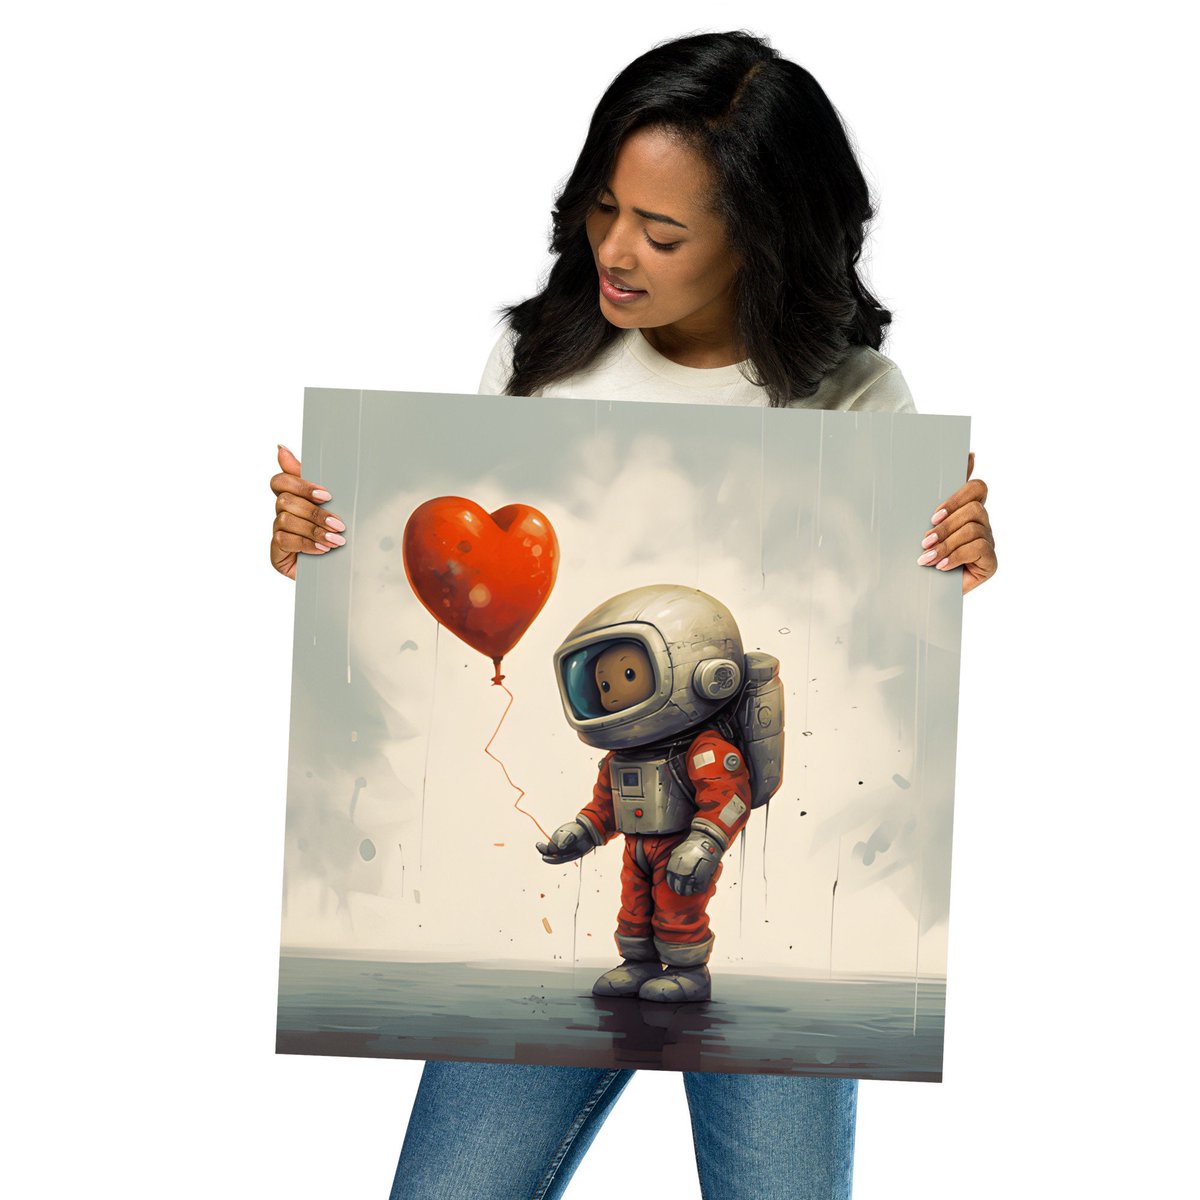 Excited to share the latest addition to my #etsy shop: Space Suit Lover Poster | Unique Portrait | Heart Balloon Art etsy.me/42Du4Wp #spacesuit #loverprint #loverposter #heartballoon #spacethemed #uniquedesign #museumquality #homedecor #wallart